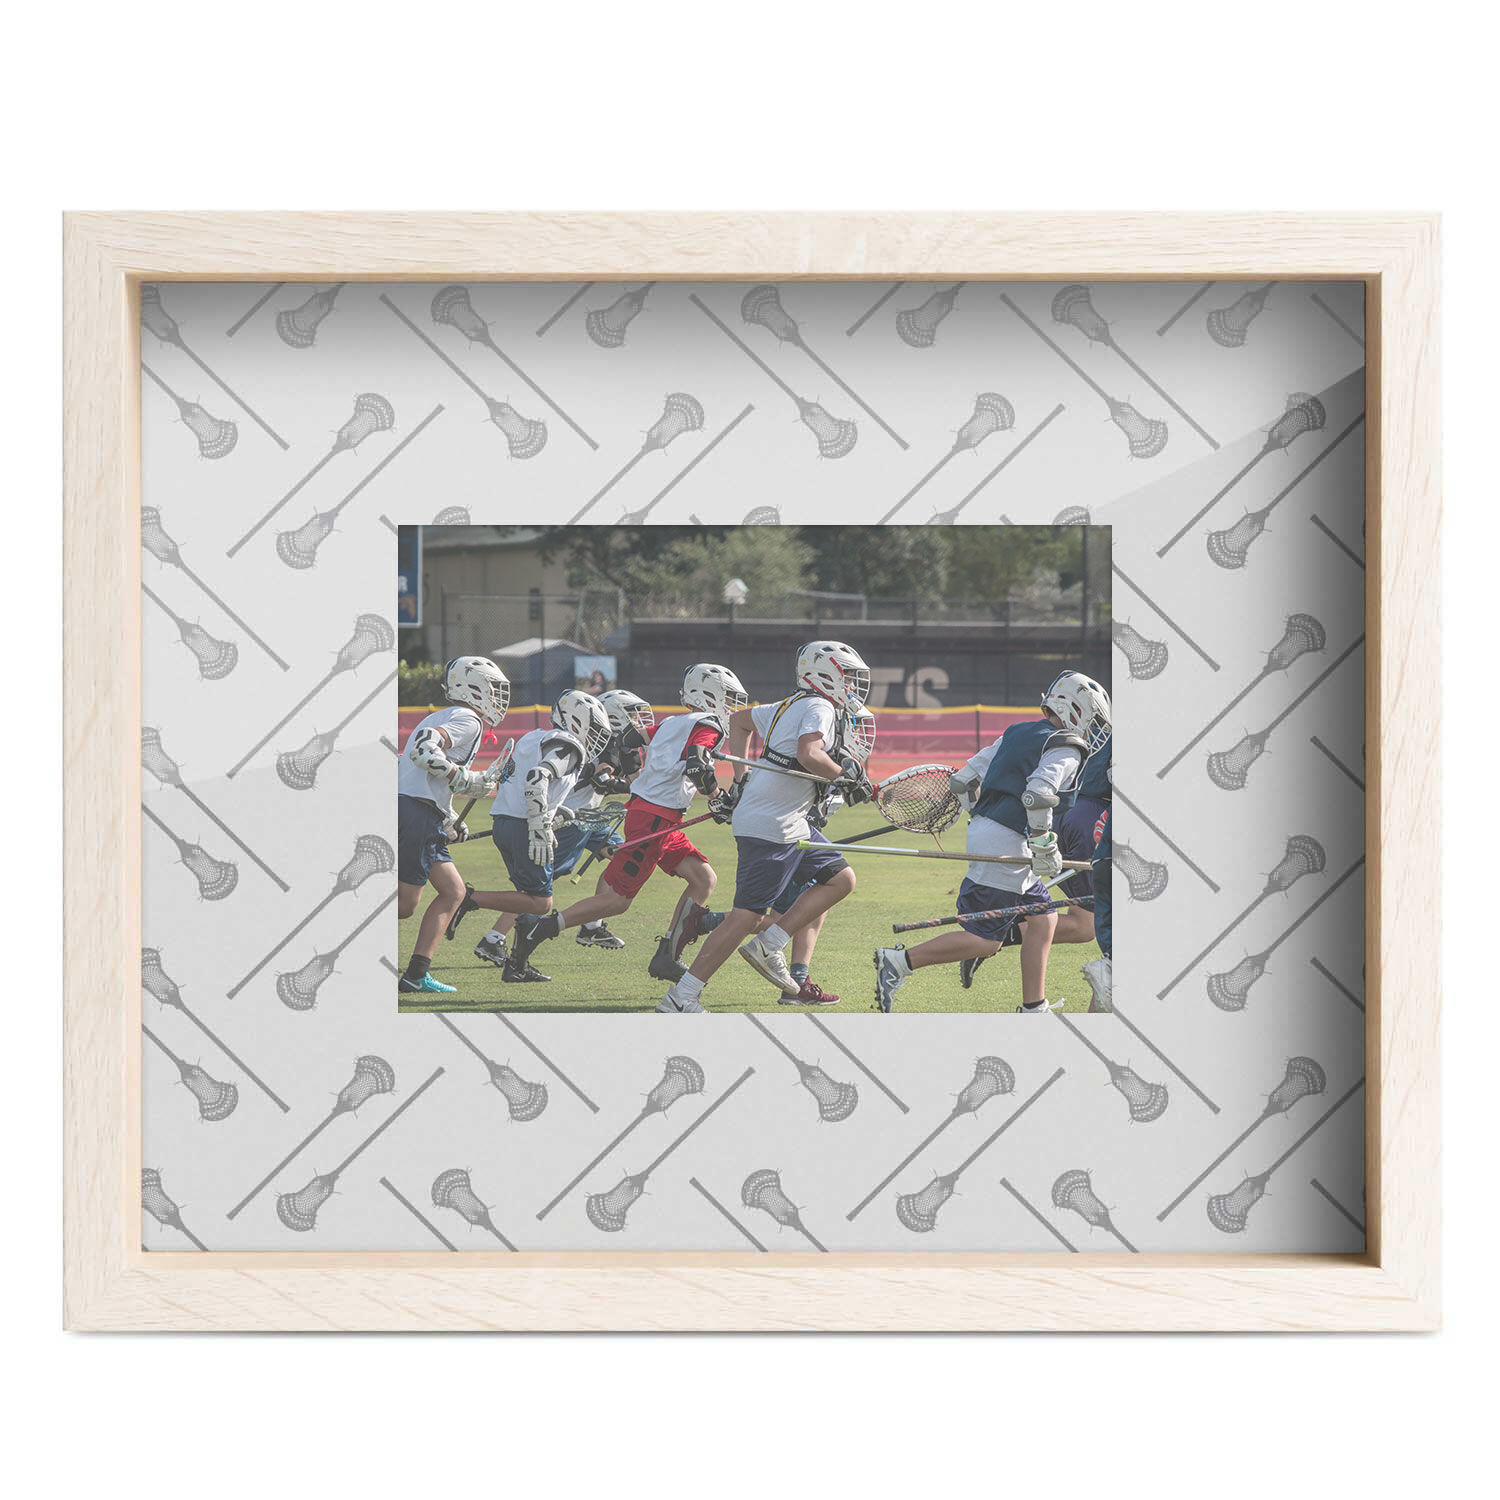 Men's Lacrosse Father Words Picture Frame White